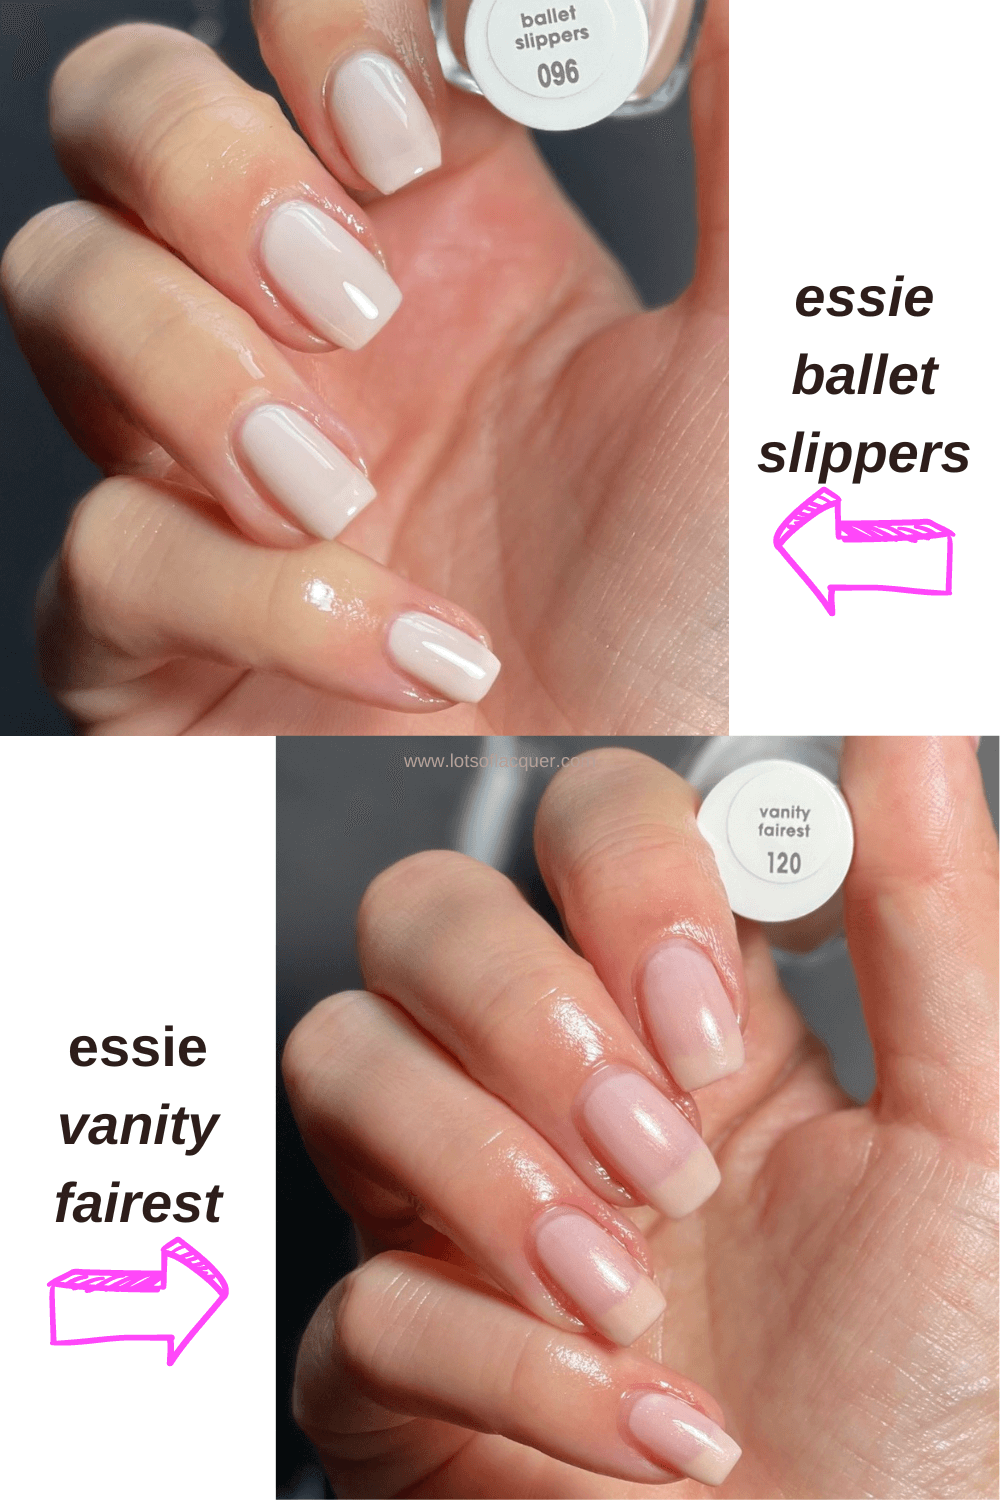 ballet slippers' is the perfect anytime mani. - essie | Essie nail, Nail  polish colors, Essie nail polish